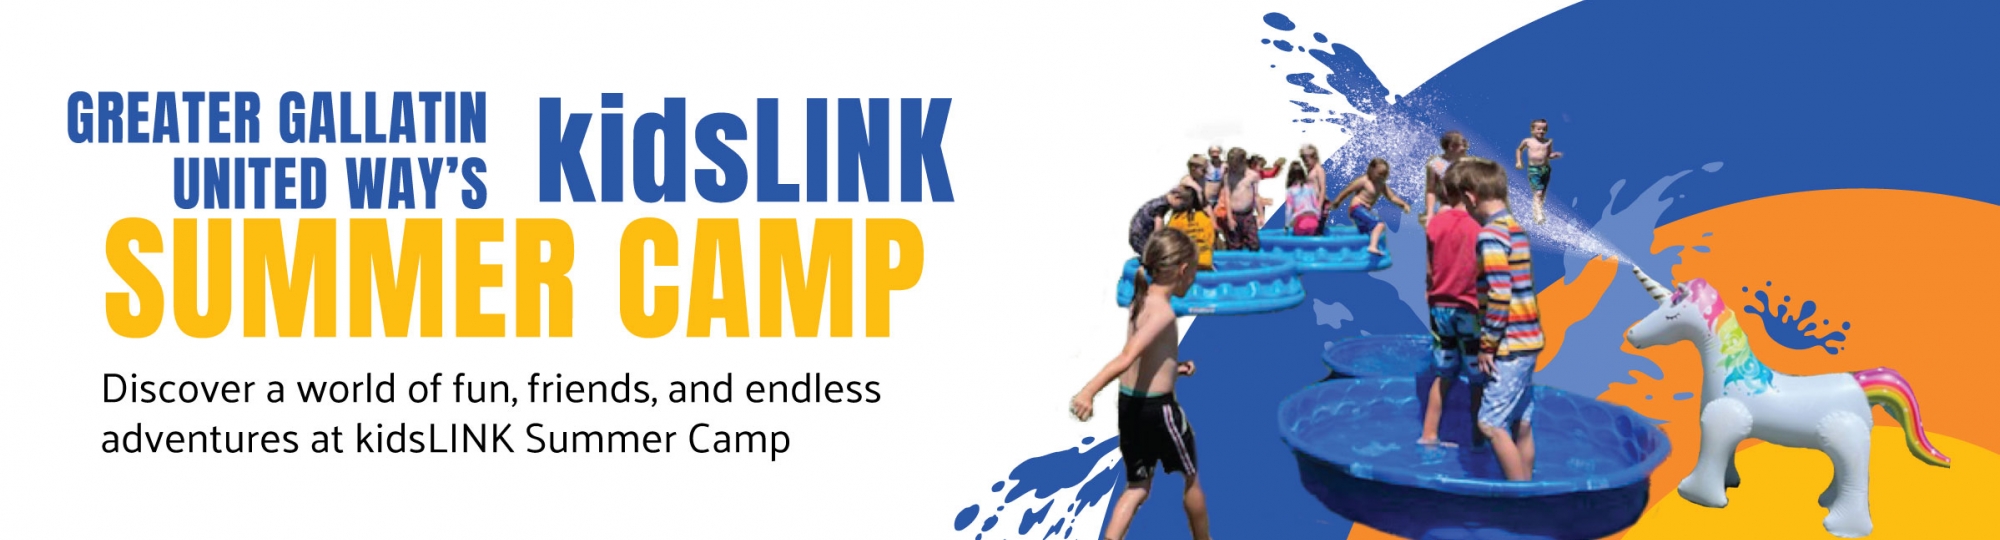 kidsLINK Summer Camps | Greater Gallatin United Way